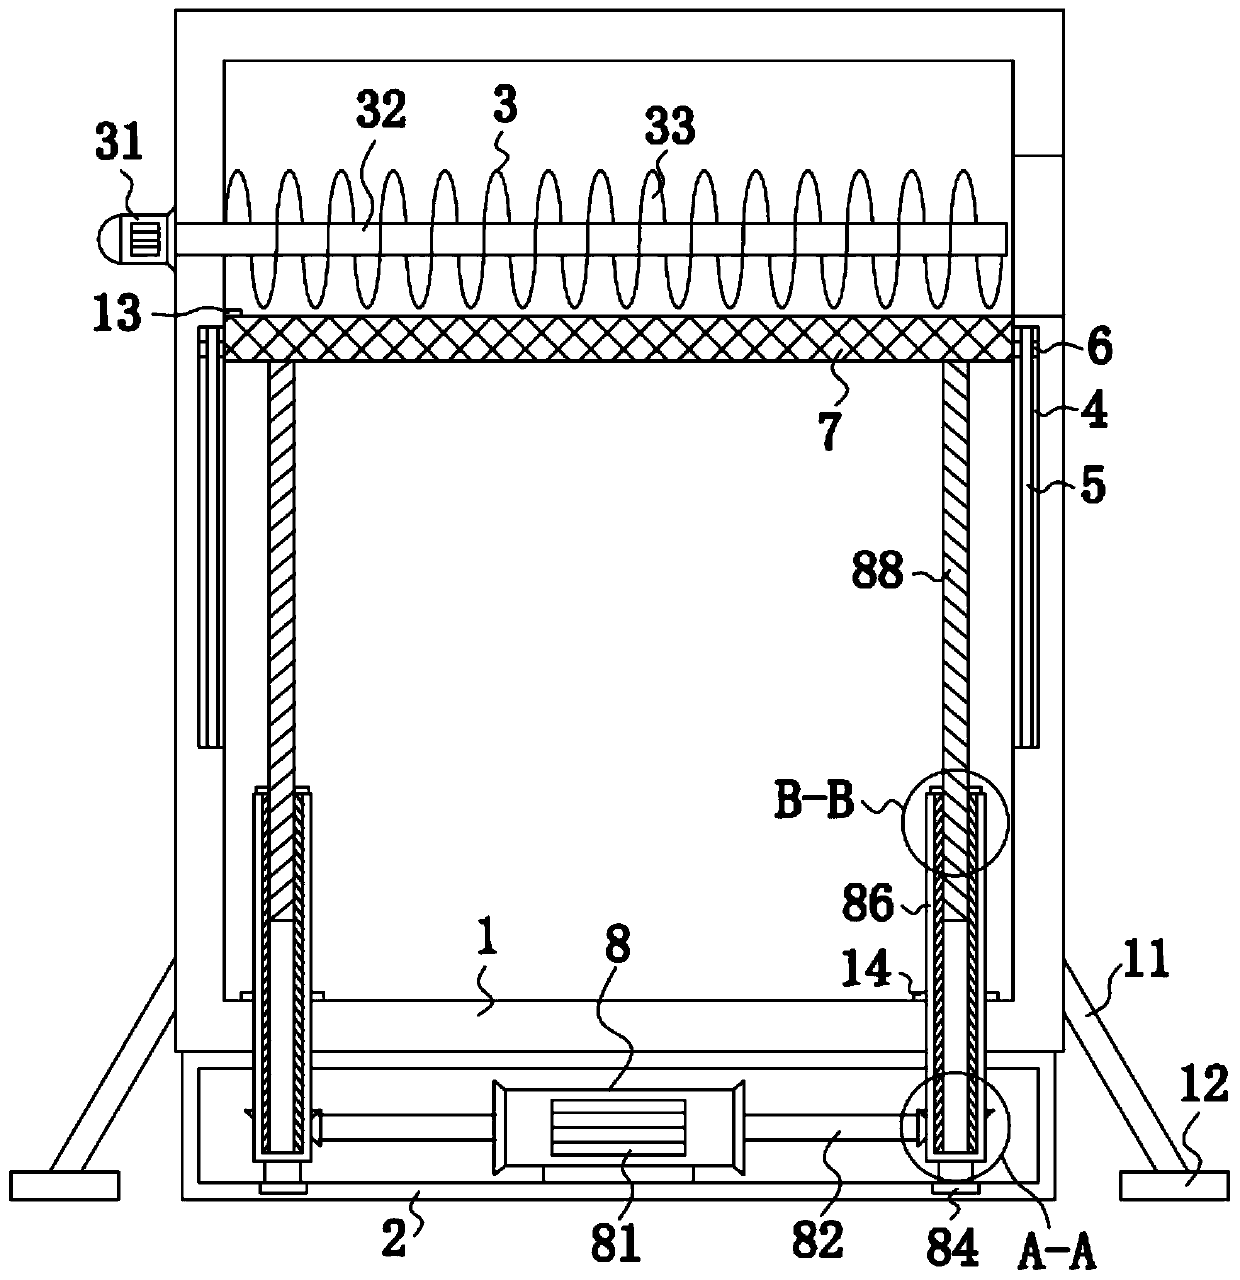 Solid-liquid separation equipment for chemical production